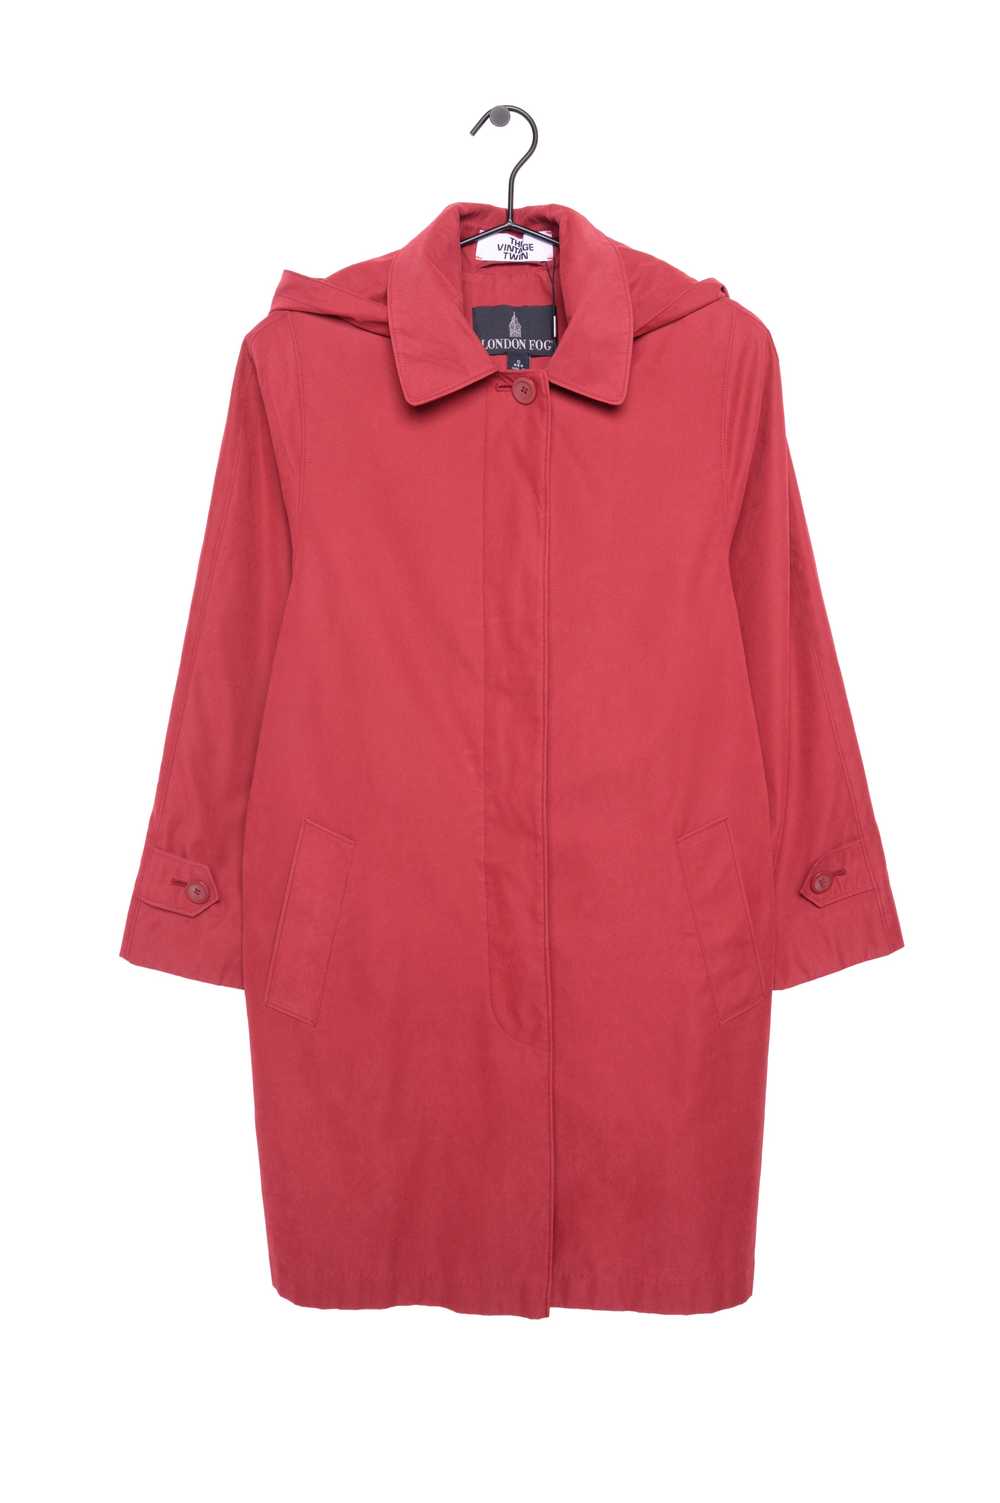 Red Hooded Trench Coat - image 1